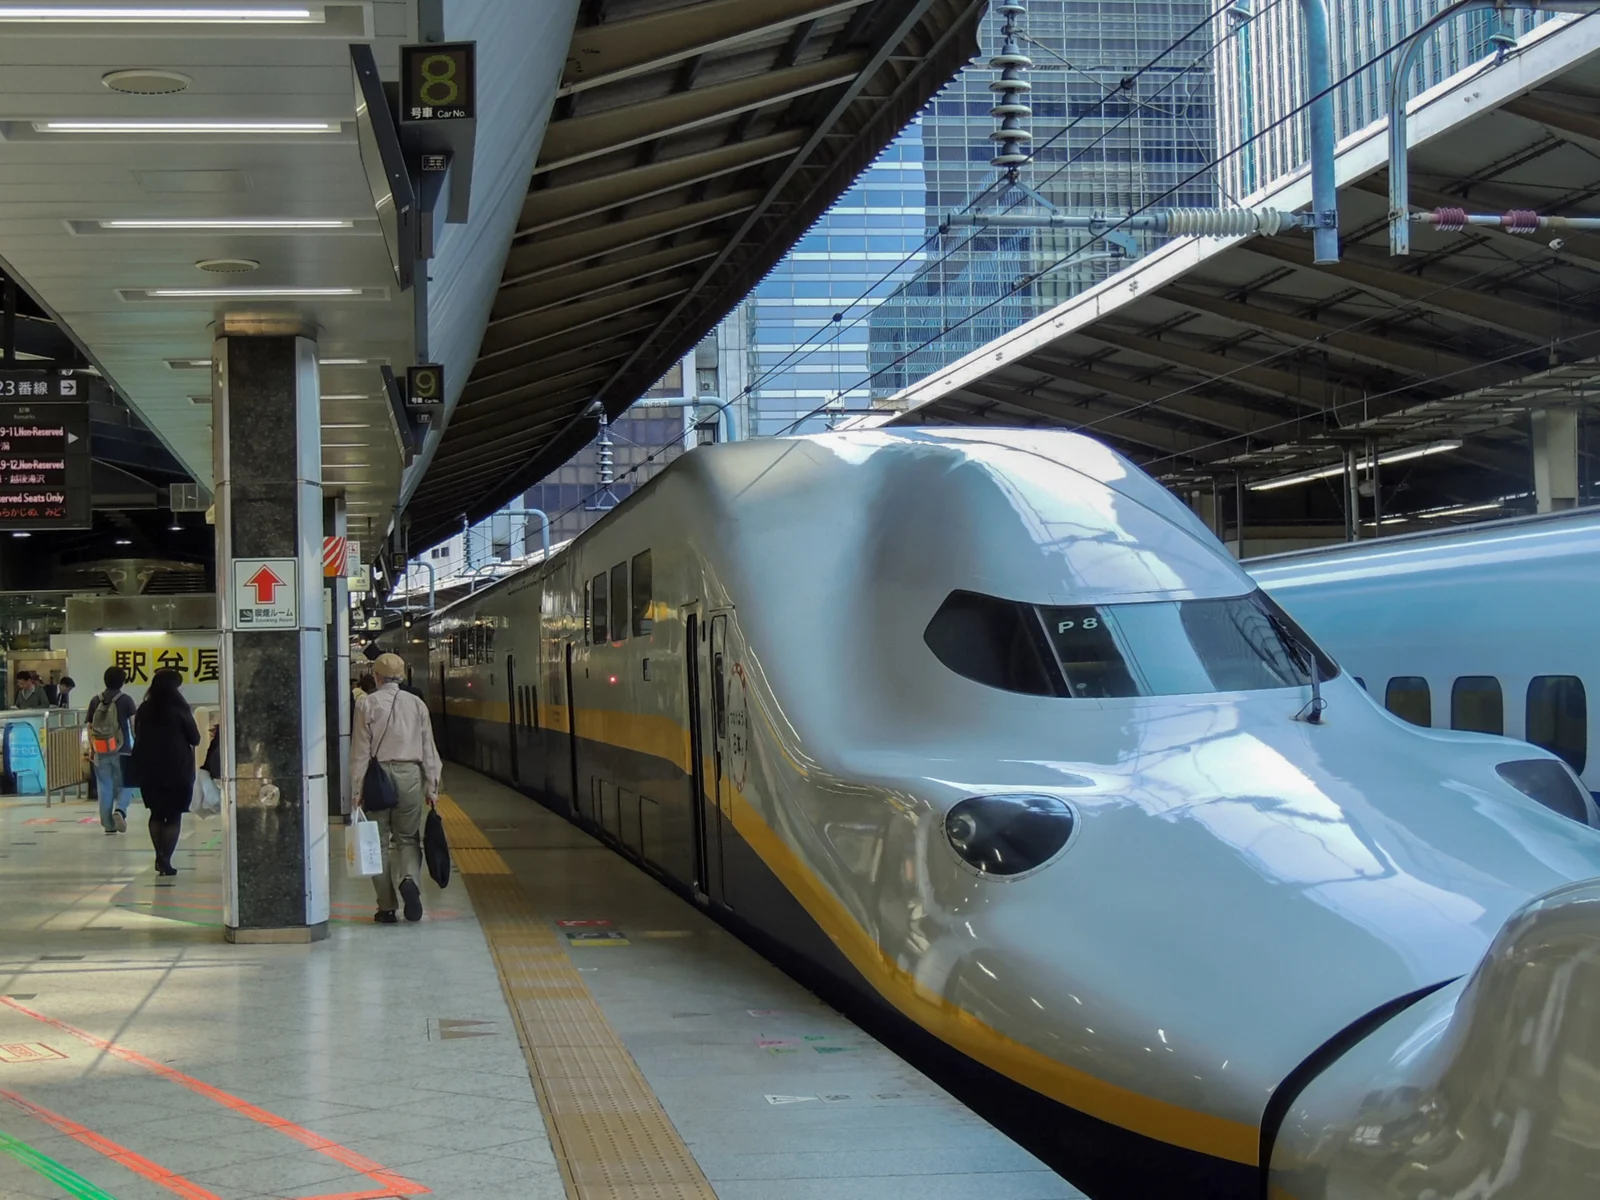 Japanese bullet train pictured from the front at the station for a piece on the best time to visit Tokyo